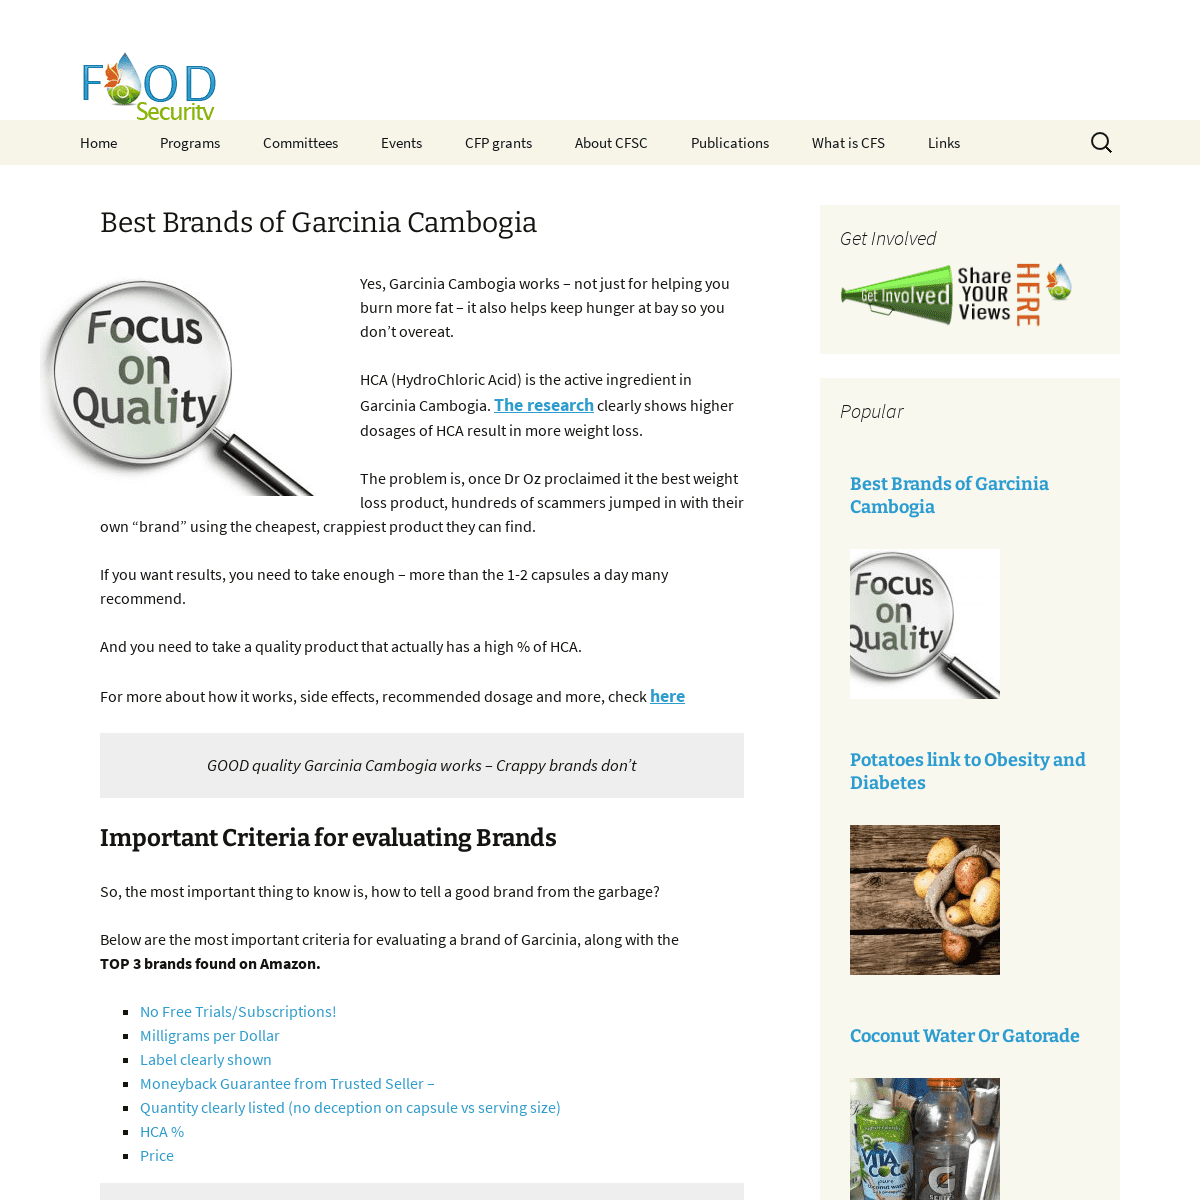 A complete backup of https://foodsecurity.org